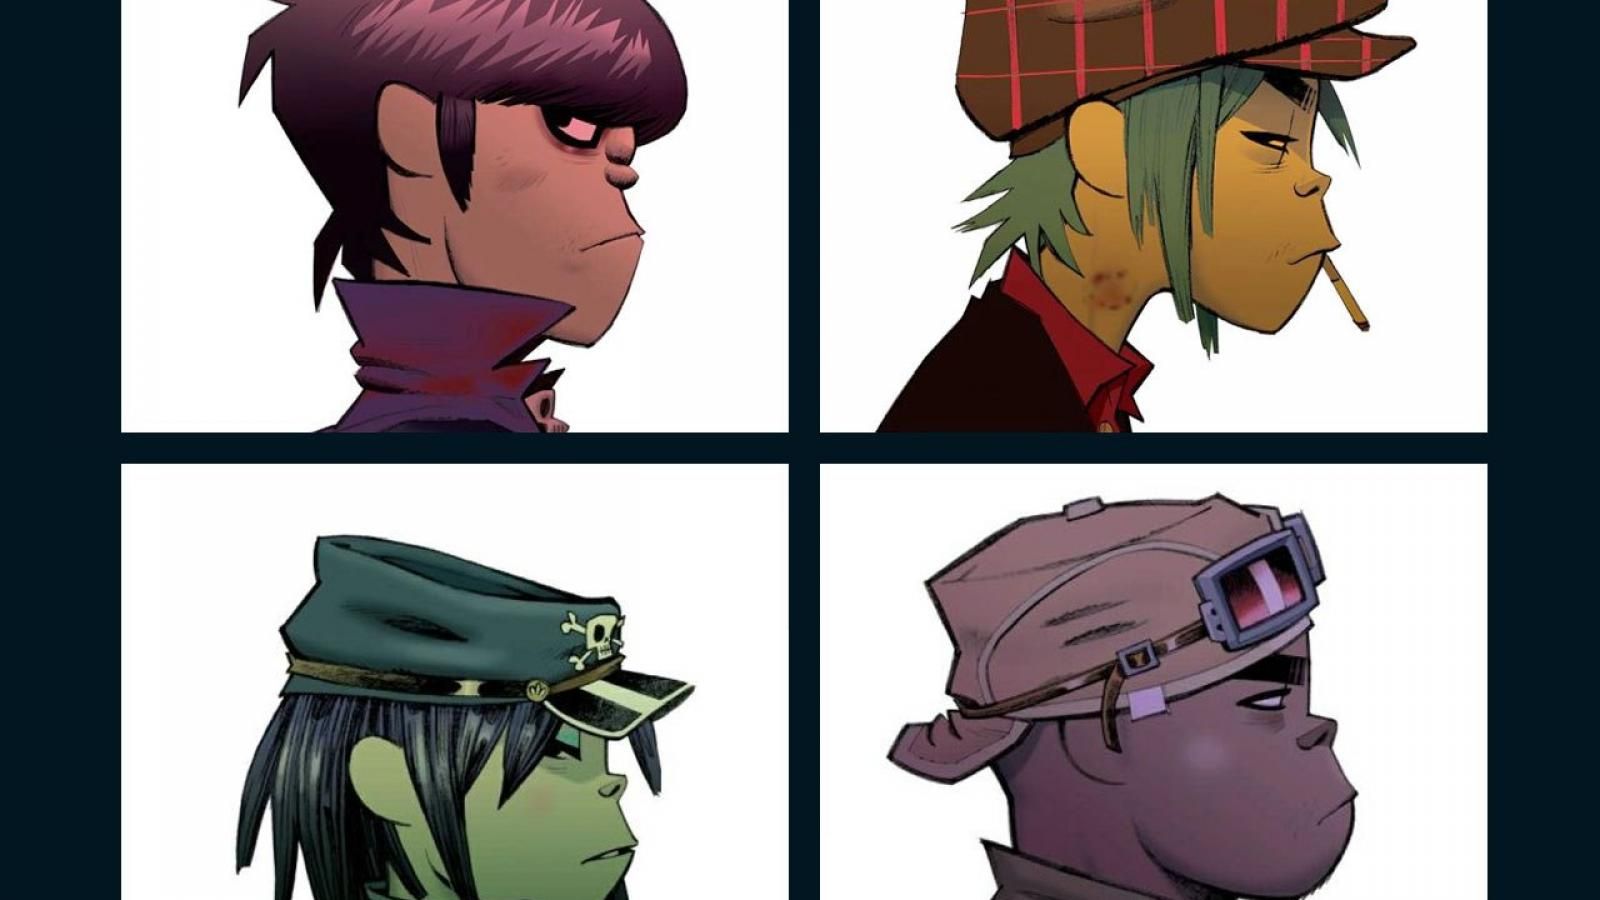 Gorillaz wallpaper 1280x1024 - (#35416) - High Quality and ...